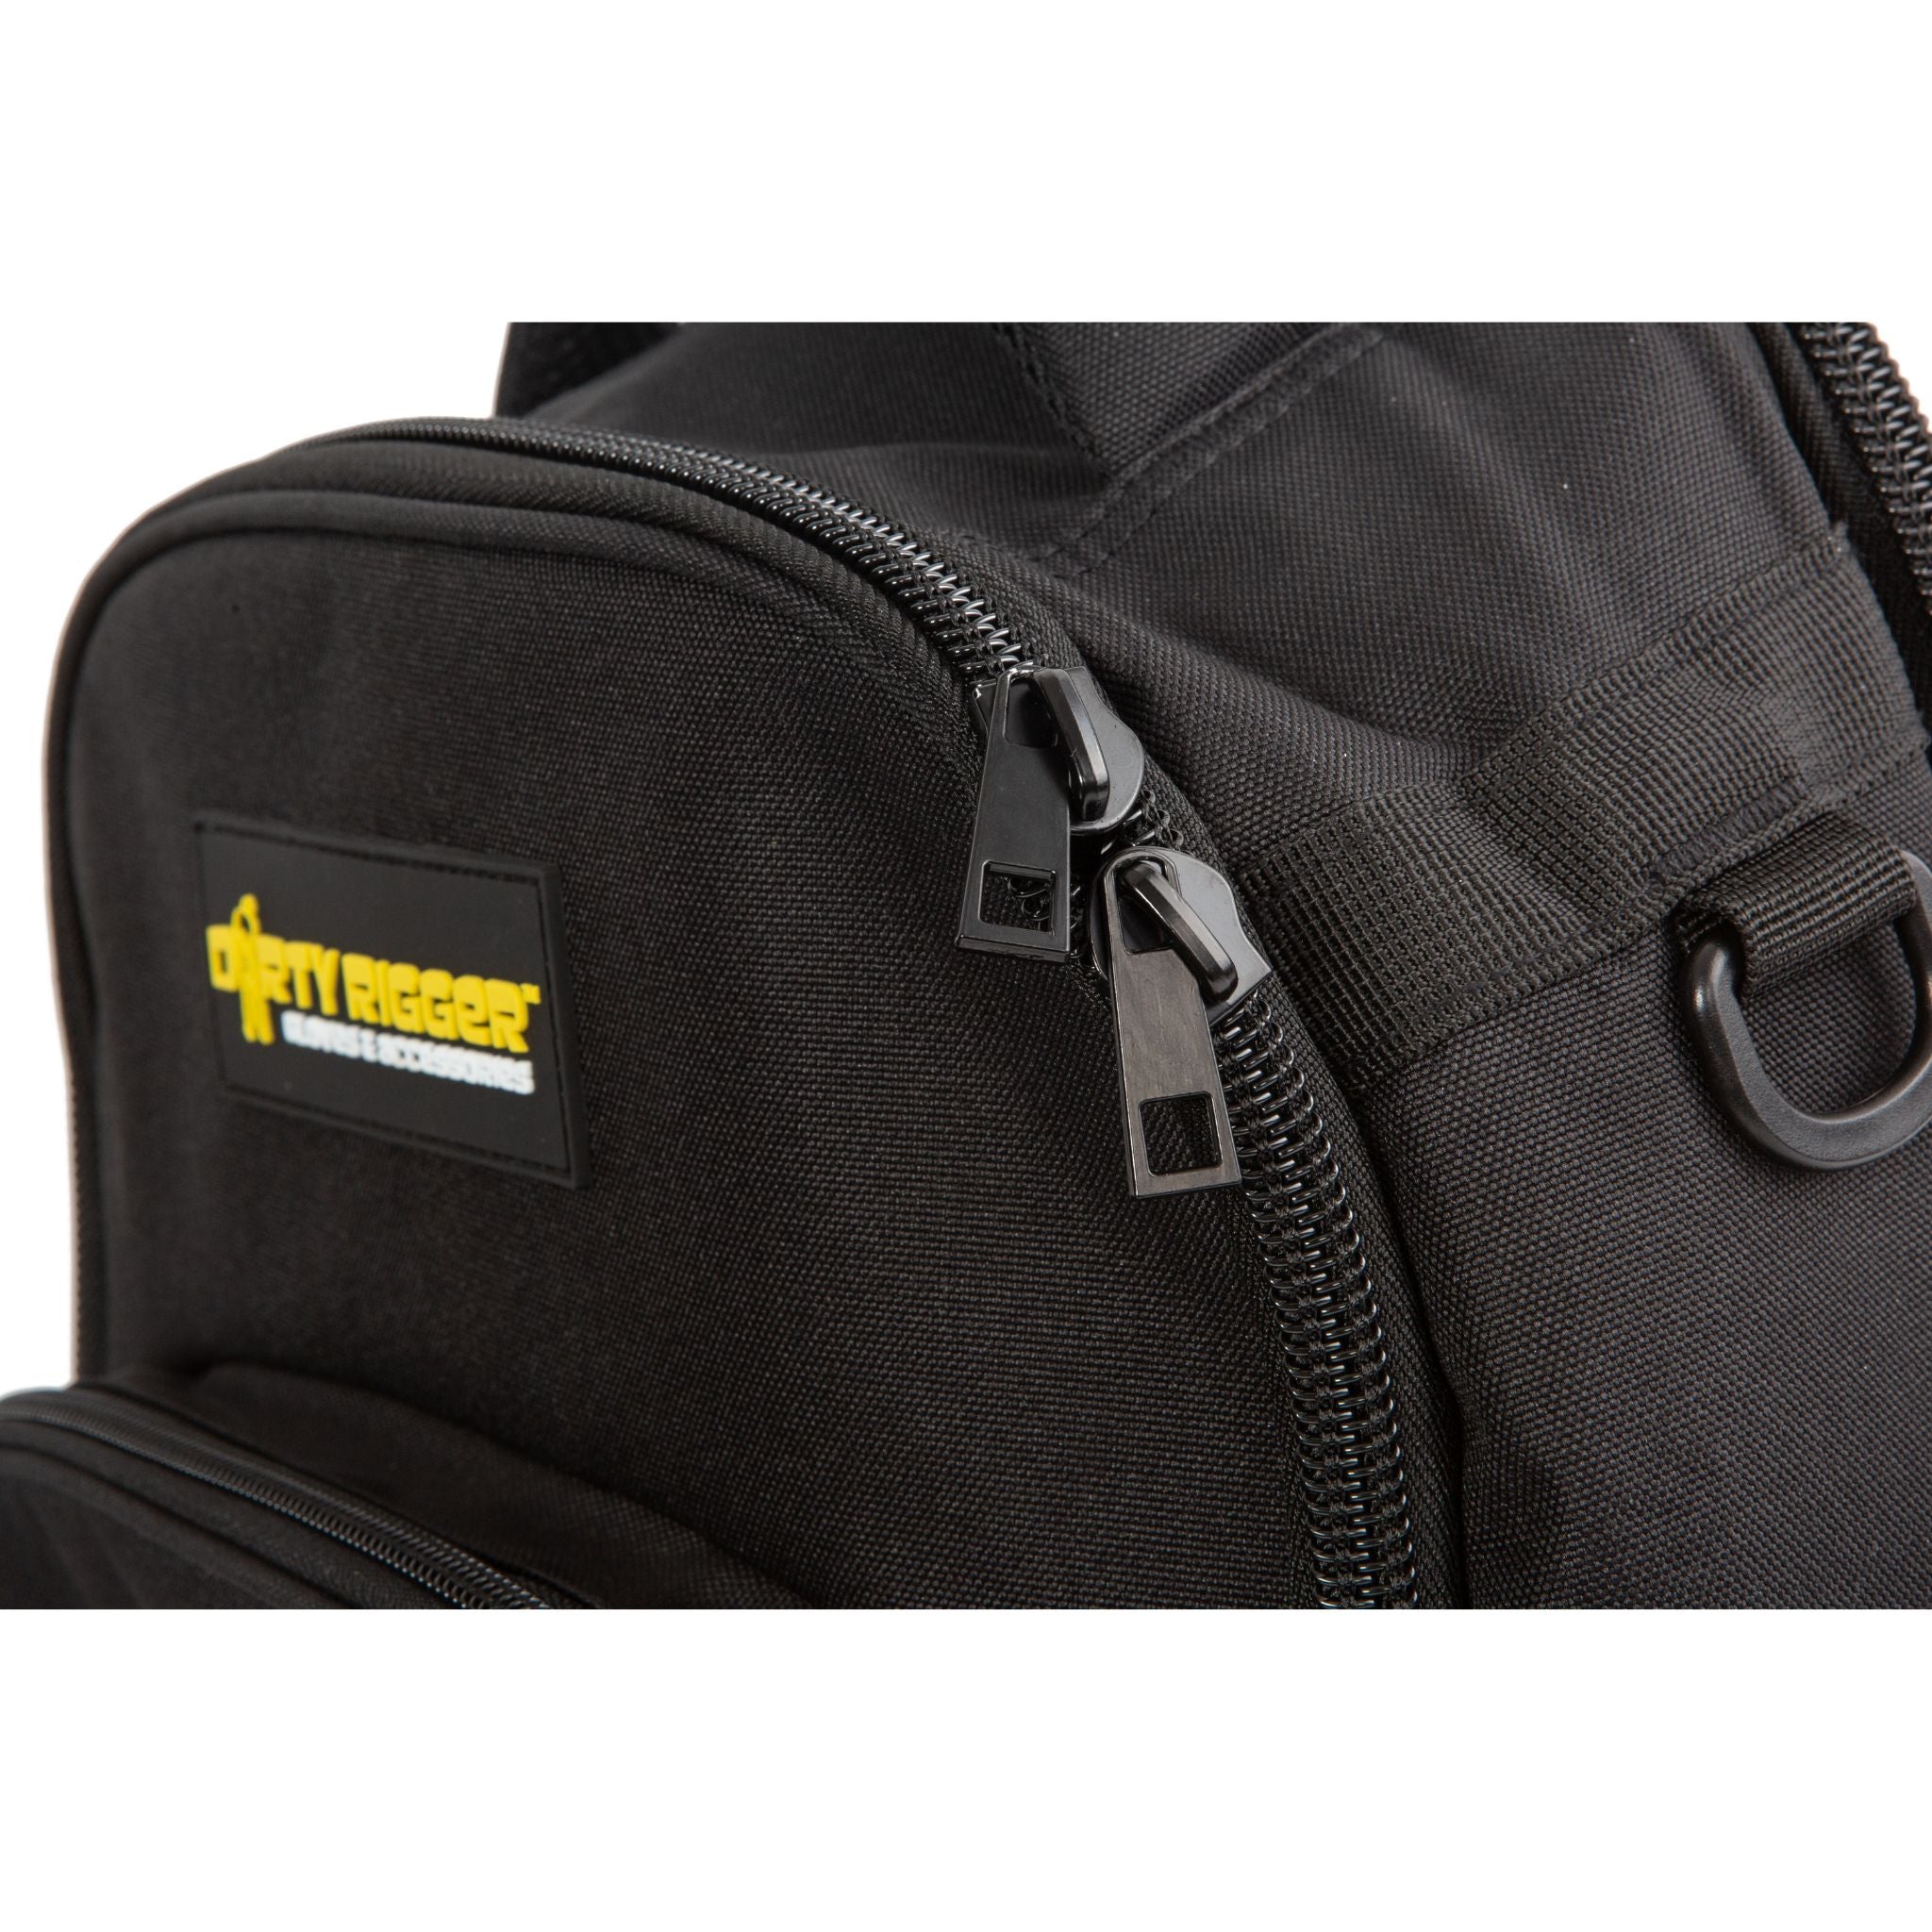 Technician's backpack d-rings and heavy-duty zippers